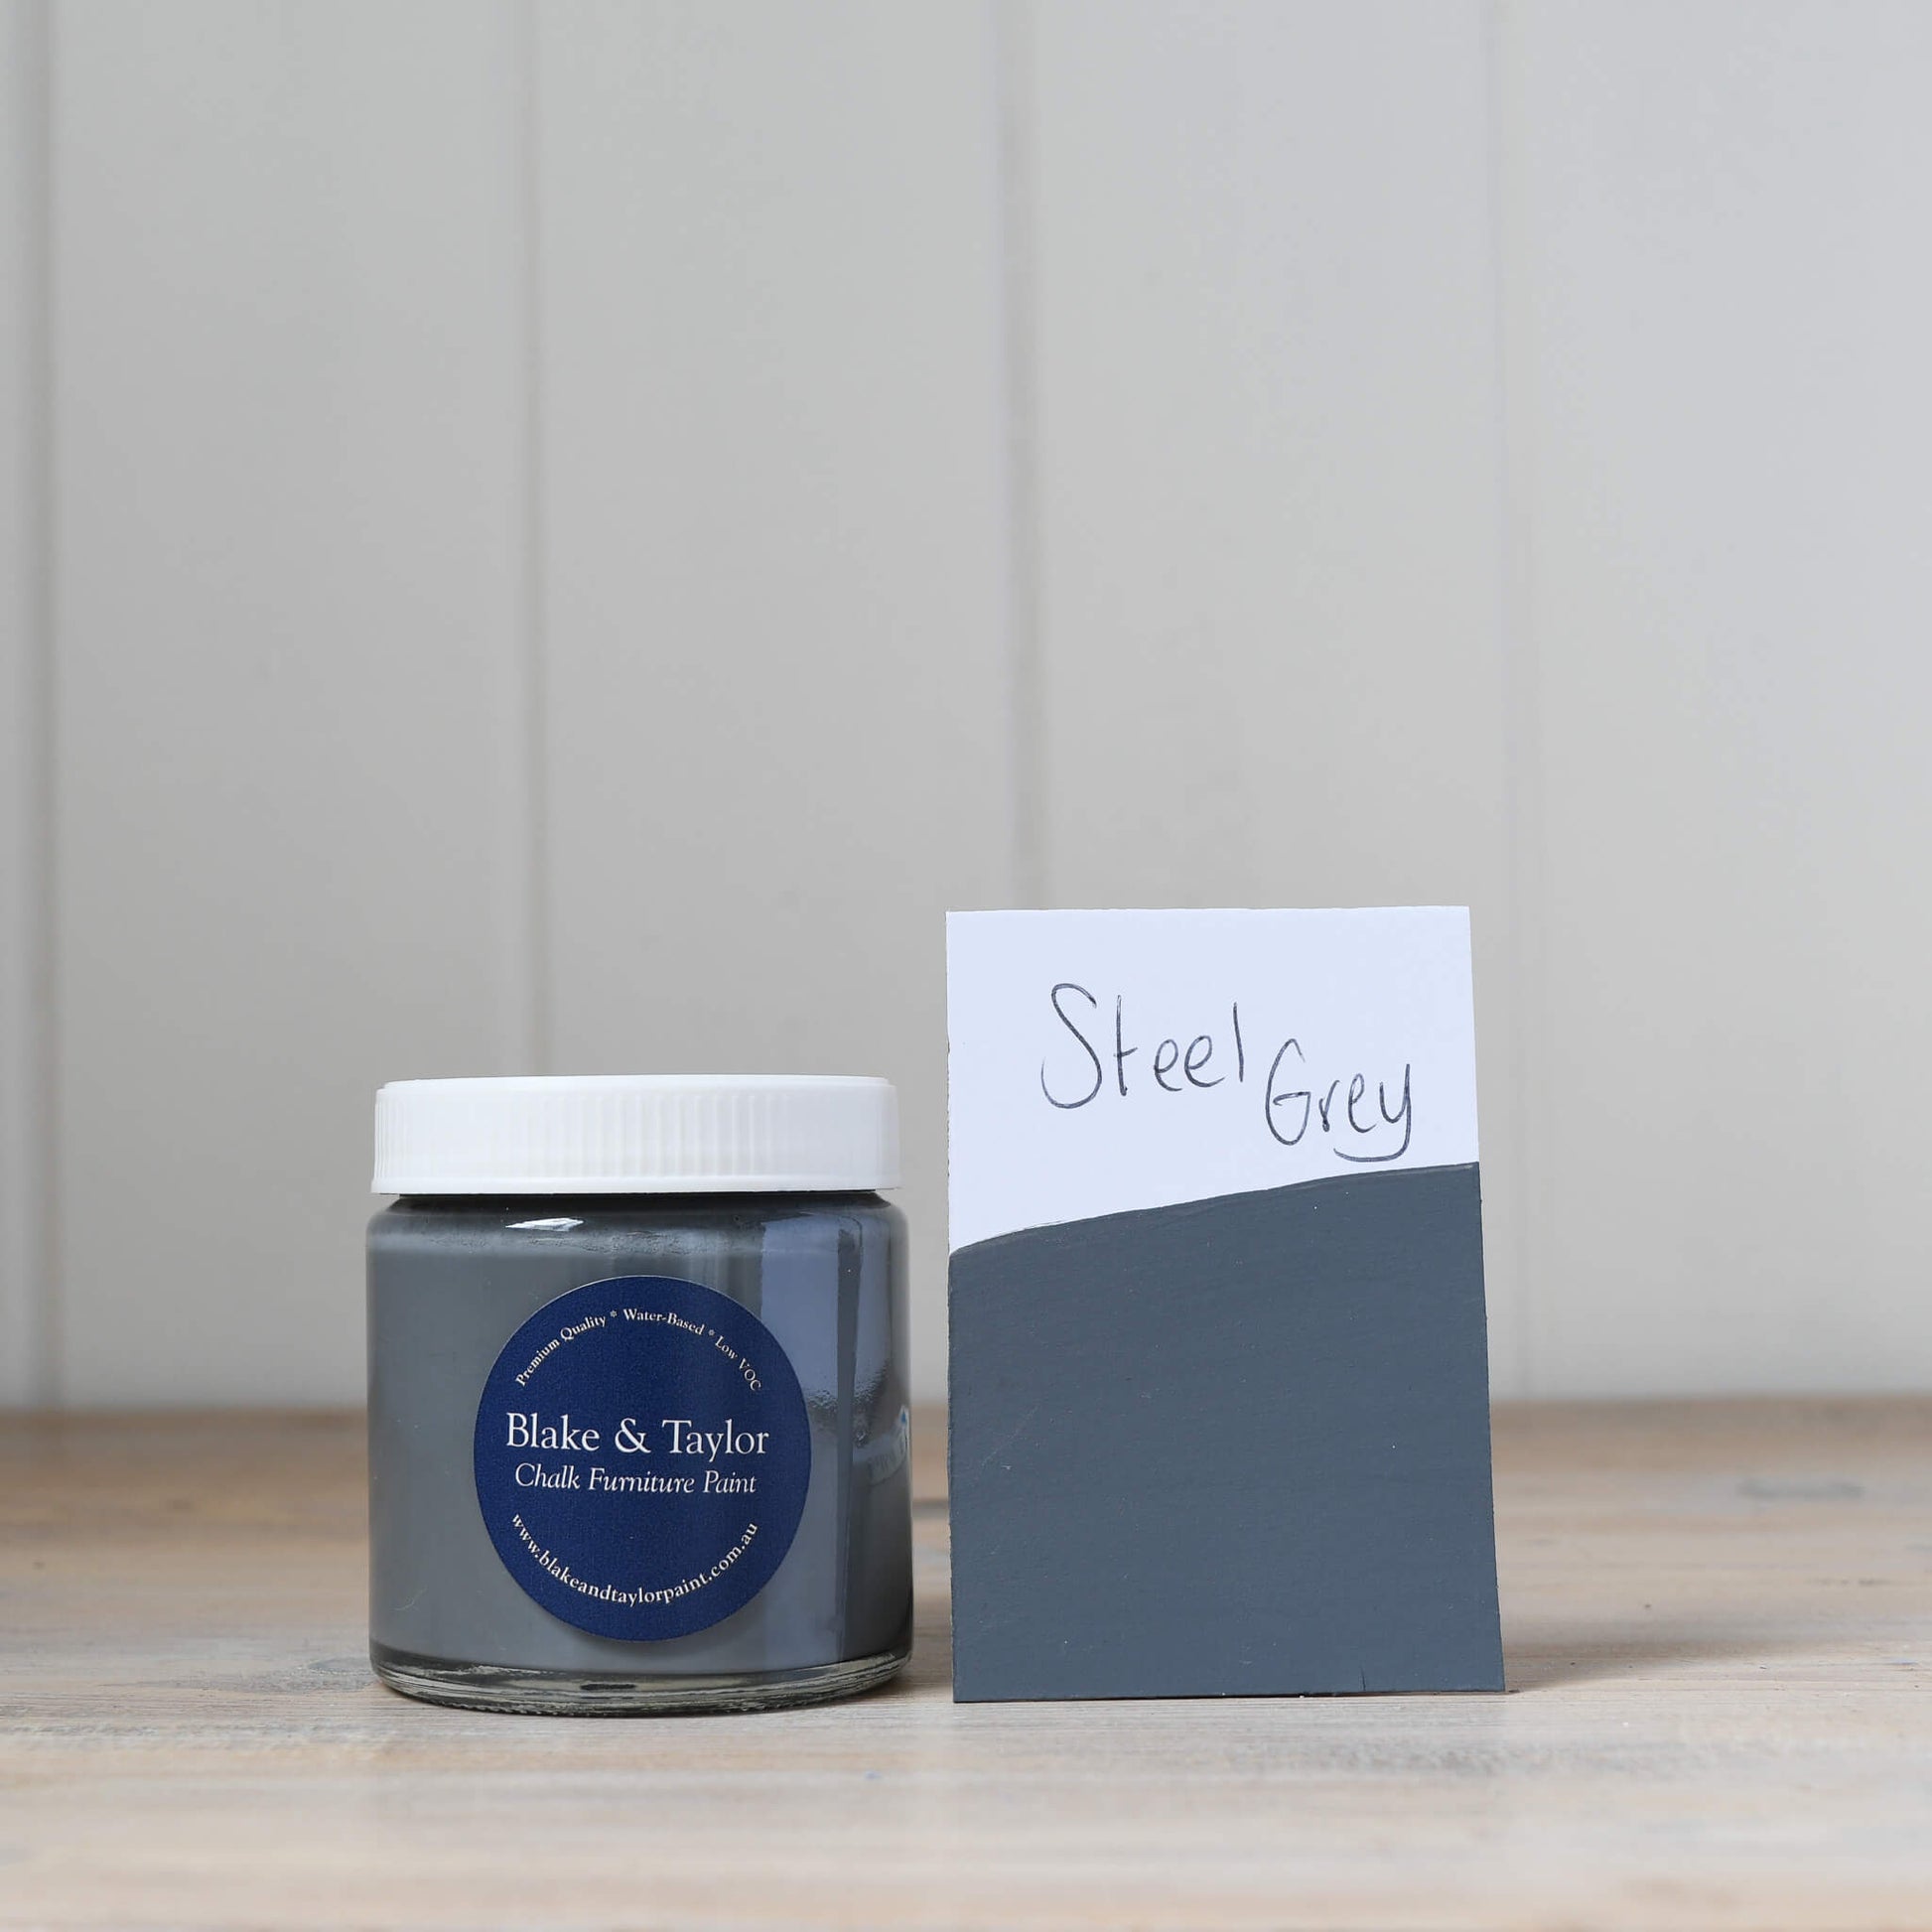 120ml pot of Steel Grey Blake & Taylor Chalk Furniture Paint with matching colour swatch